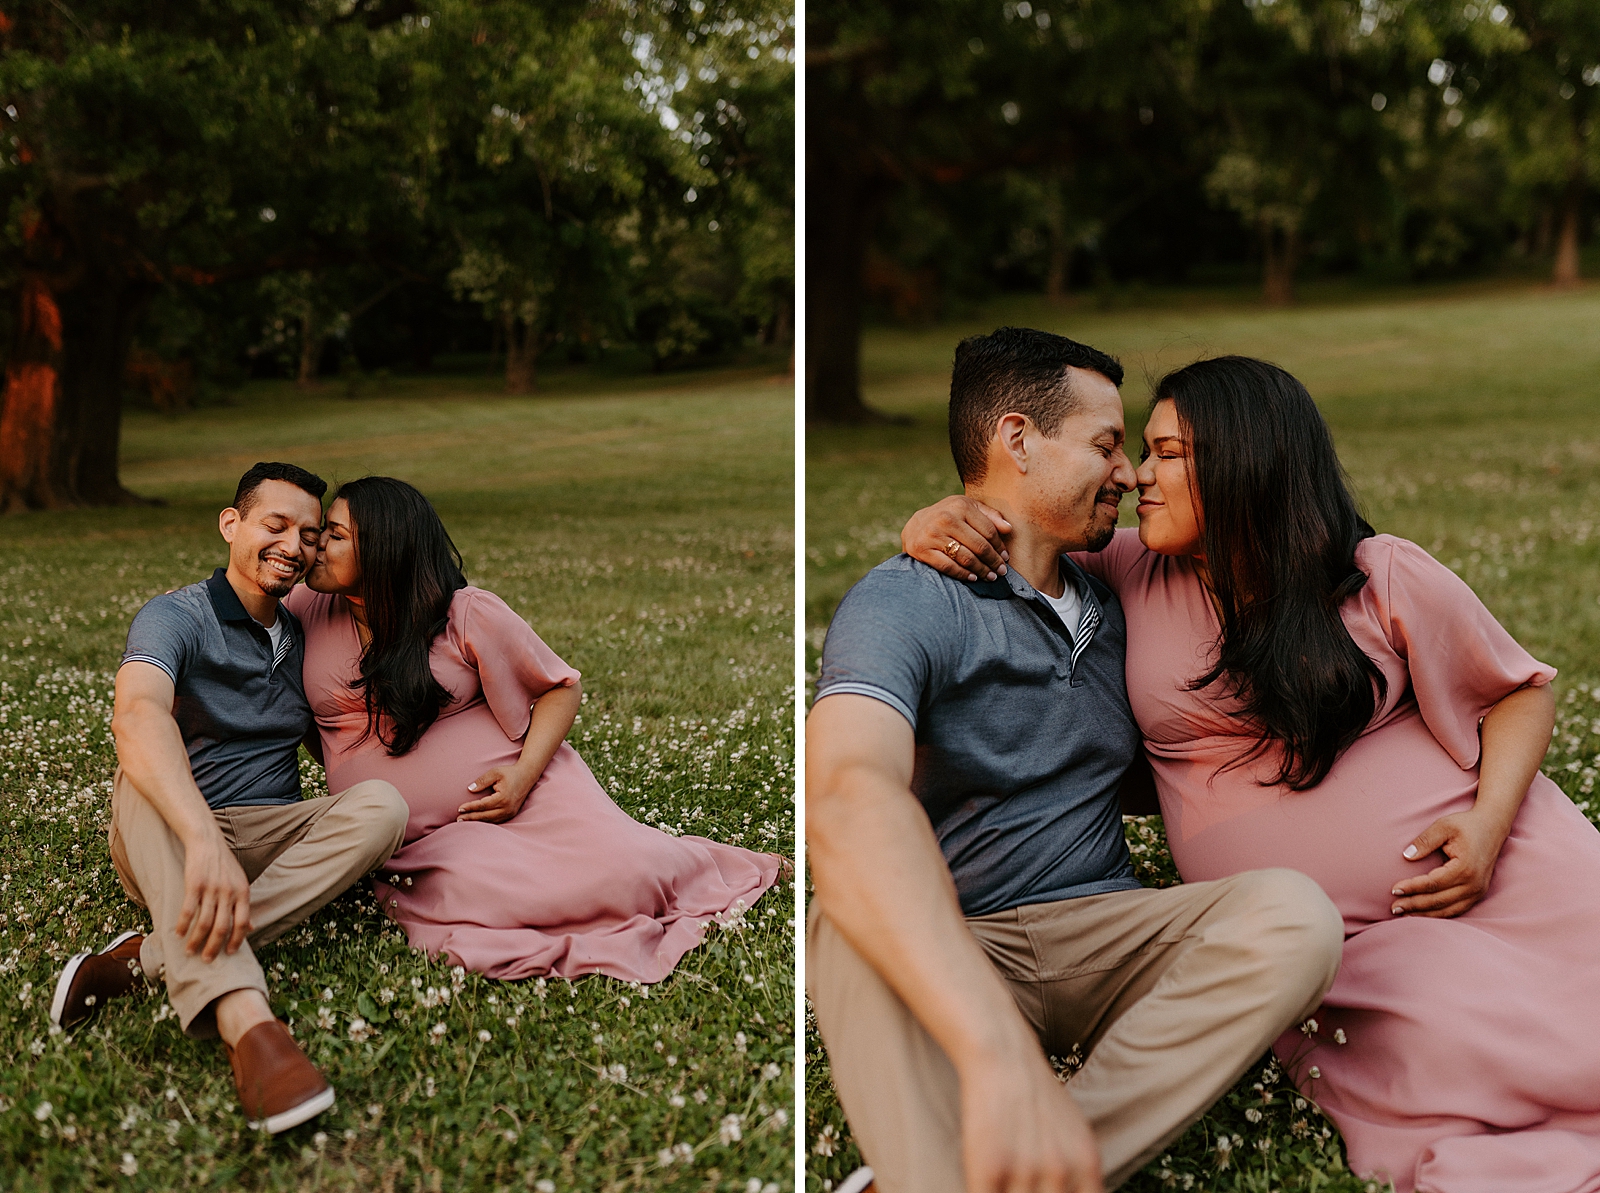 Pregnant couple sitting on grassy field together